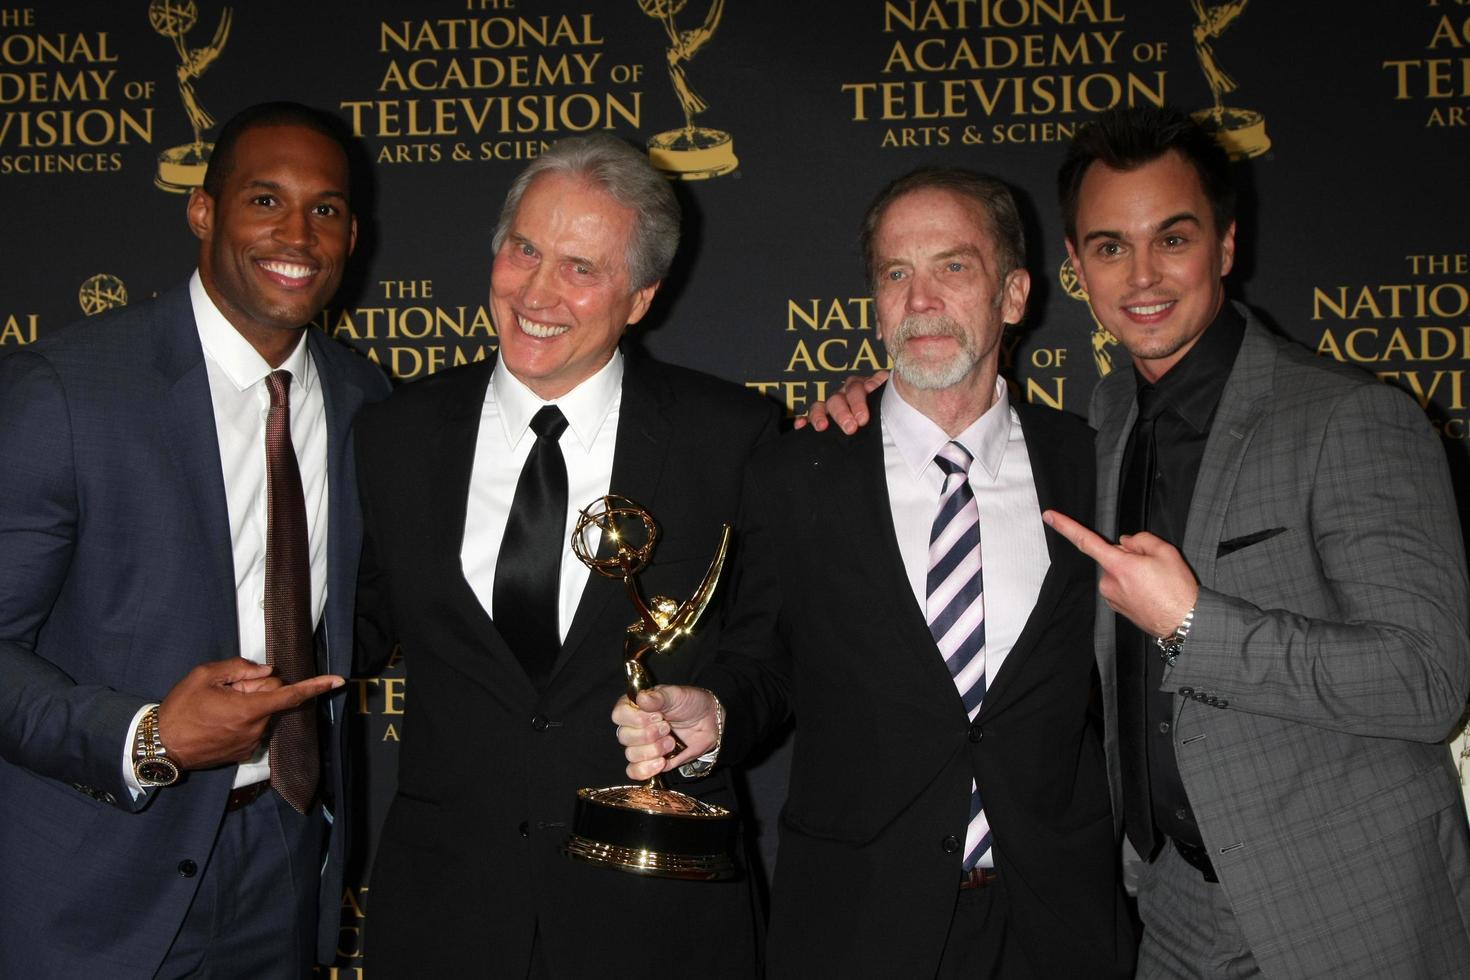 LOS ANGELES, FEB 24 - Lawrence Saint-Victor, Gordon Sweeney, unknown, Outstanding Technical Team, Bold and Beautiful, Darin Brooks at the Daytime Emmy Creative Arts Awards 2015 at the Universal Hilton Hotel on April 24, 2015 in Los Angeles, CA photo